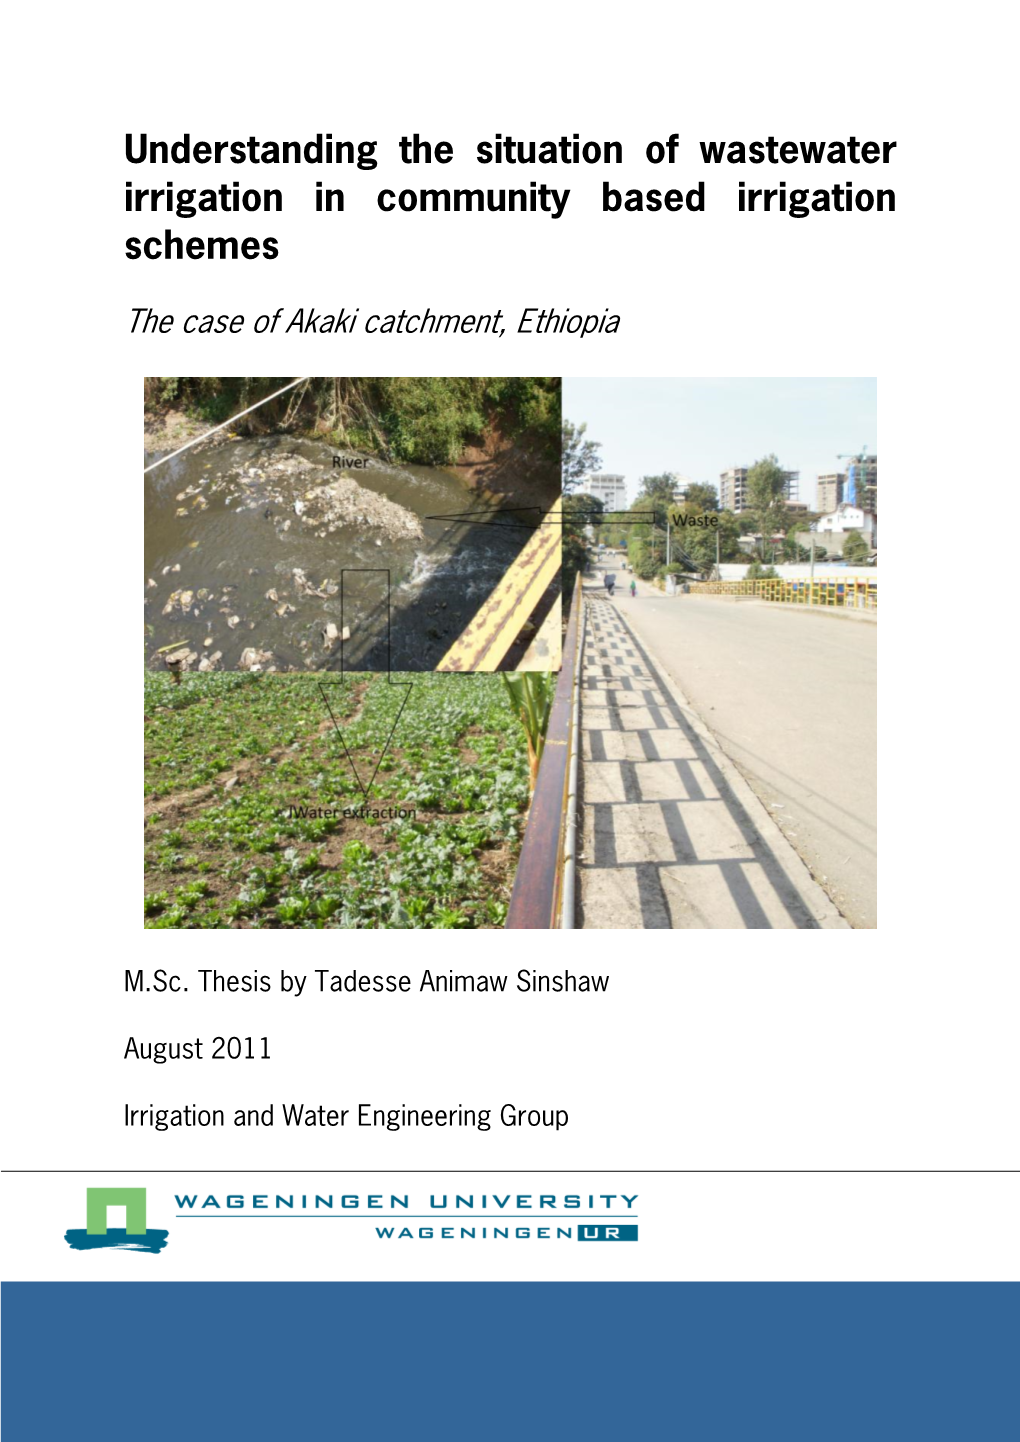 Understanding the Situation of Wastewater Irrigation in Community Based Irrigation Schemes